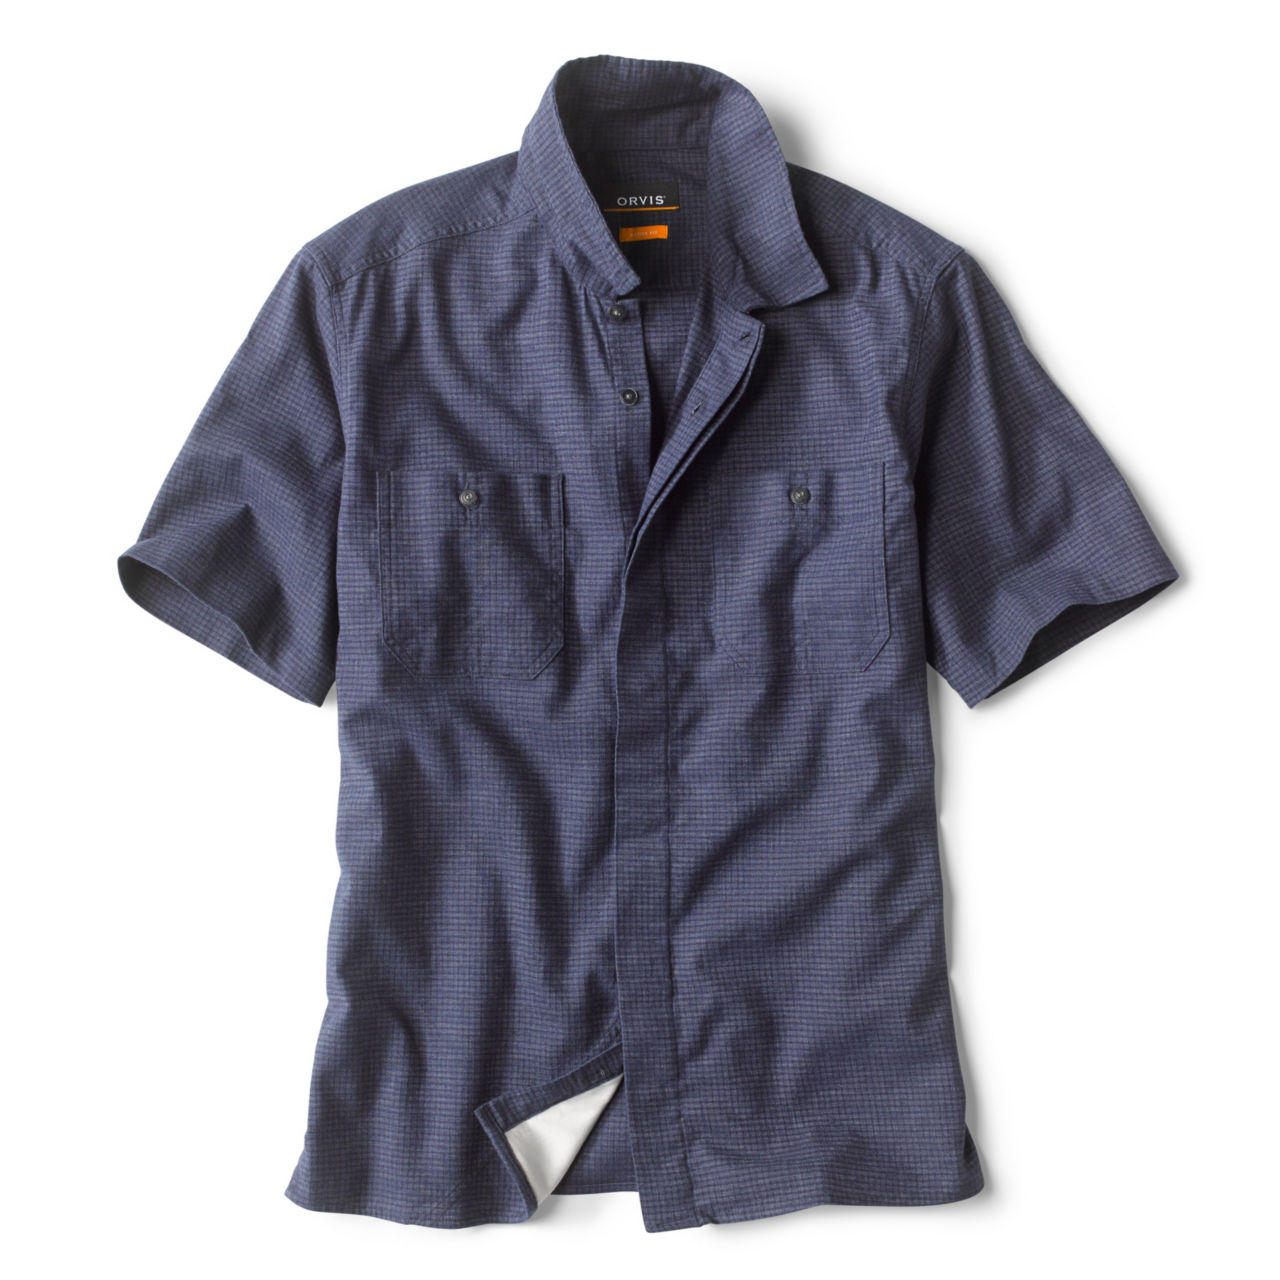 Hemp/Recycled Poly Ripstop Short-Sleeved Shirt - BLUE MOON image number 0